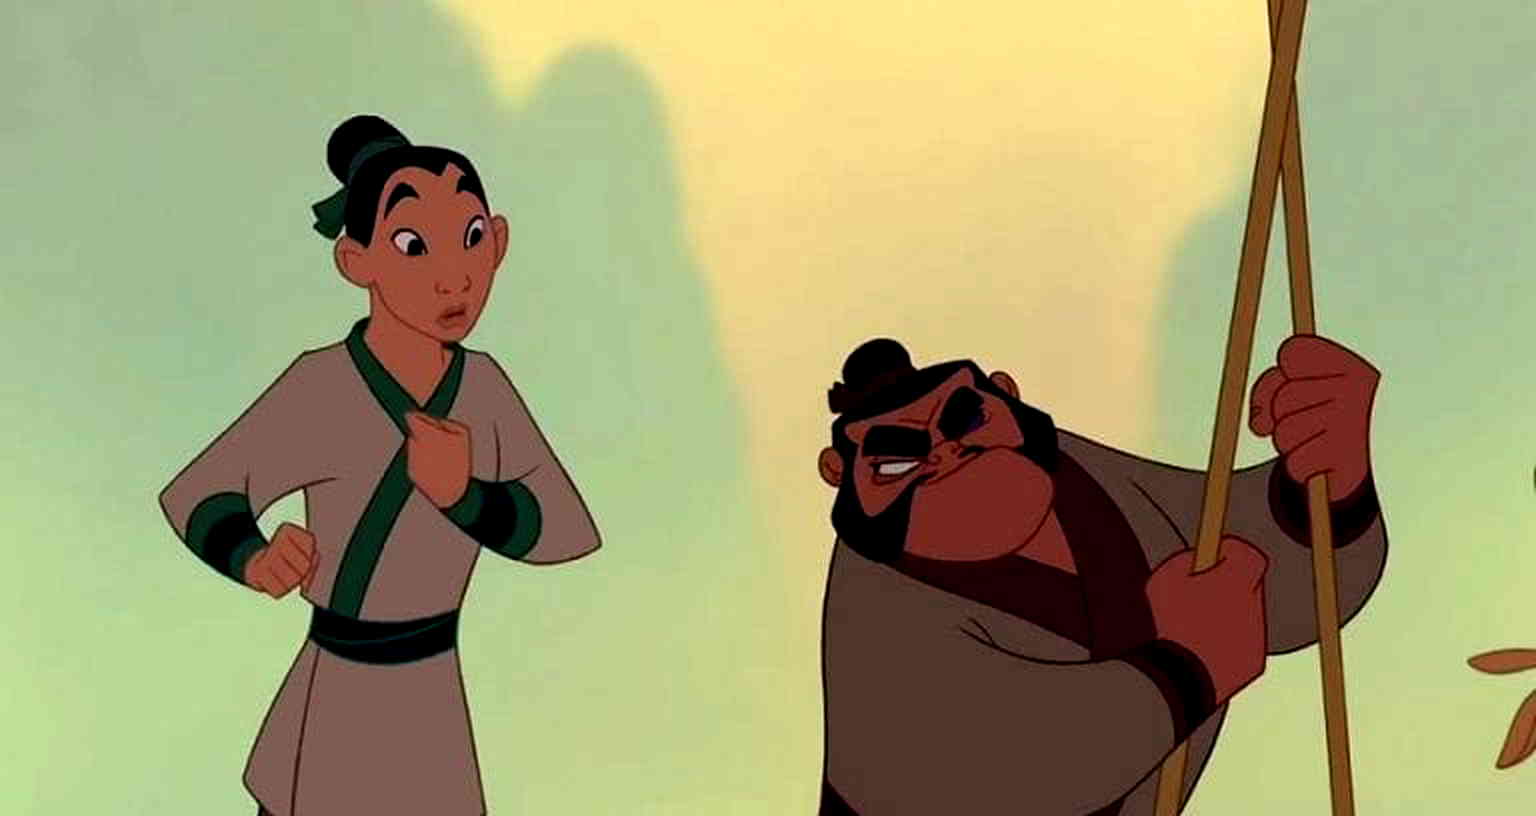 Production for Disney’s Live-Action ‘Mulan’ to Begin in January 2018